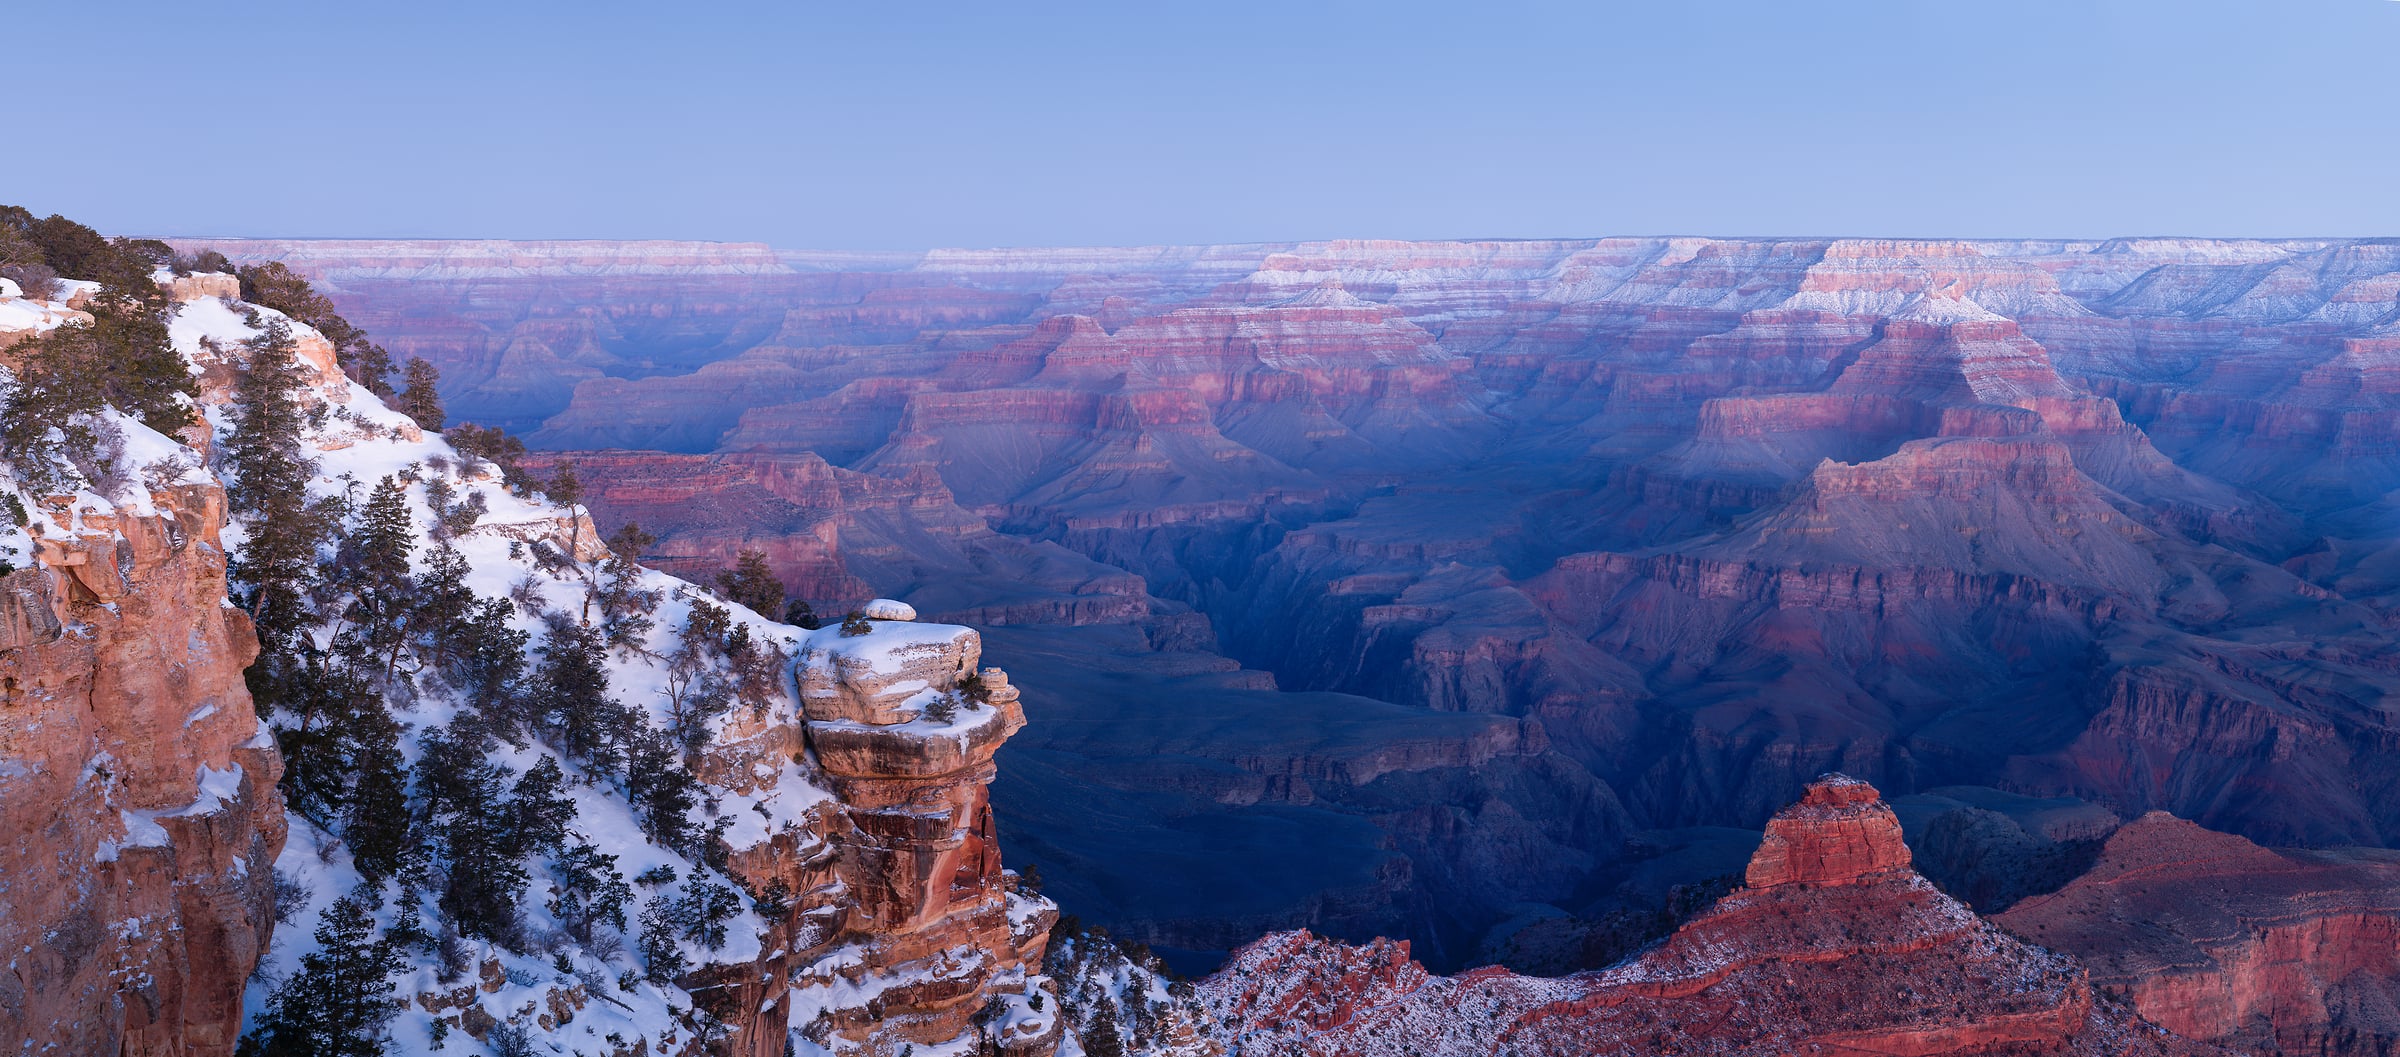 500 megapixels! A very high resolution, large-format VAST photo print of the Grand Canyon at sunrise; landscape photograph created by Greg Probst in Grand Canyon National Park, Arizona